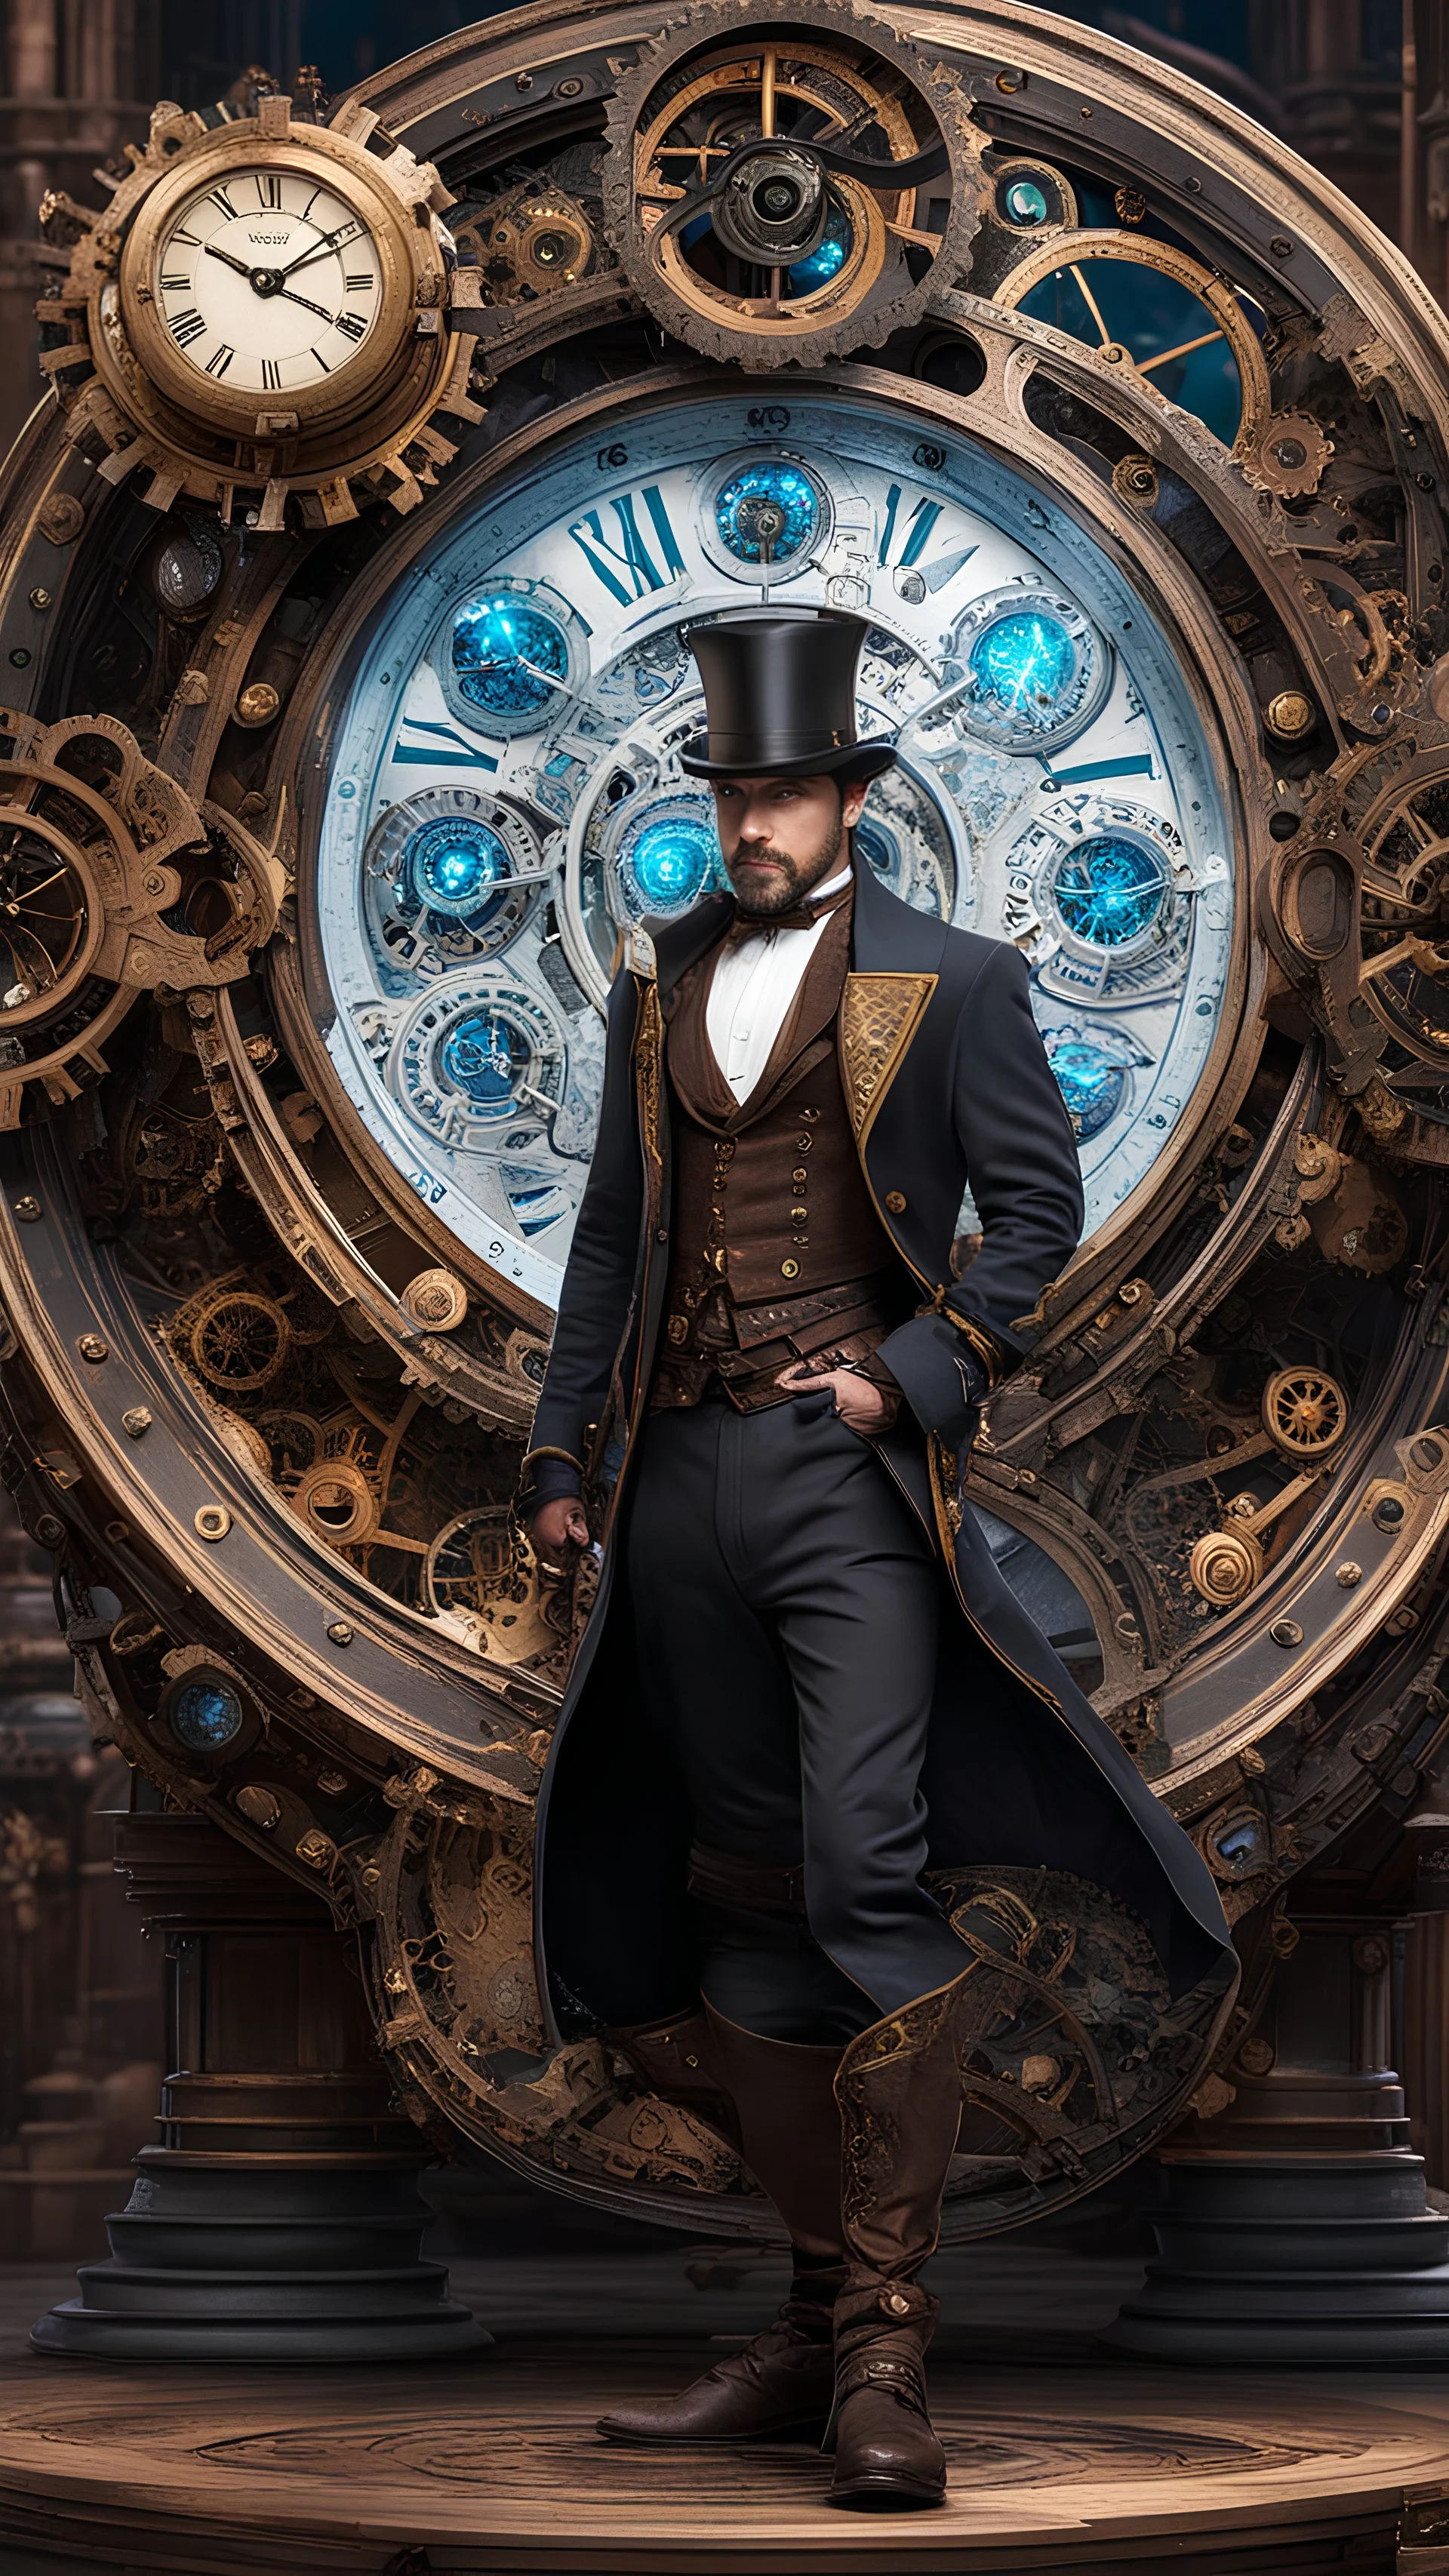 a time-traveling machine explorer surrounded by intricate gears, clocks, and time portals. Showcase detailed Victorian-inspired steampunk attire and emphasize the fusion of past and future elements